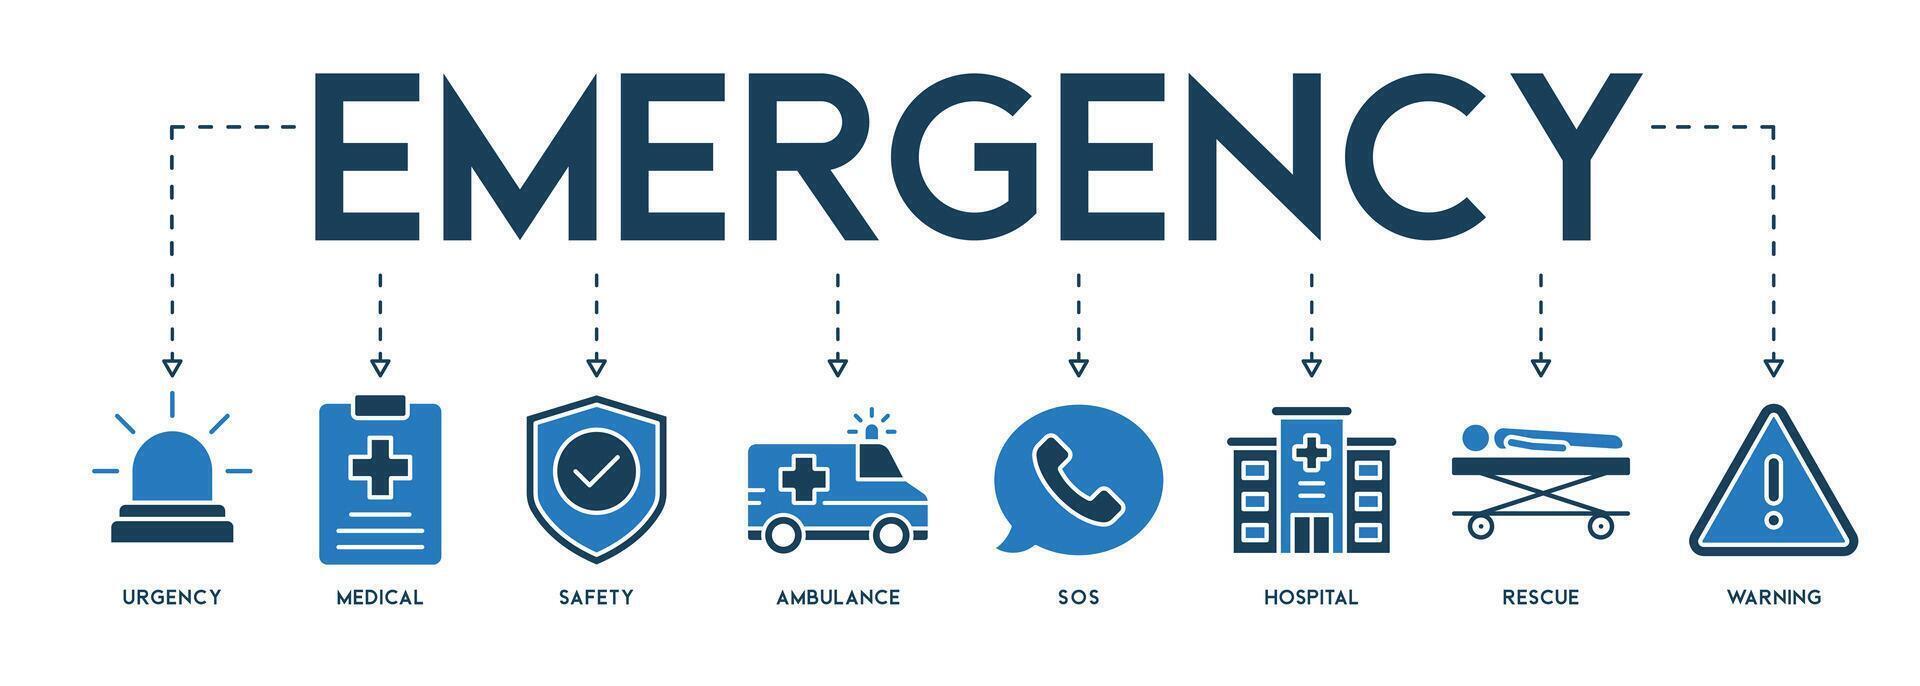 banner of emergency vector illustration design concept with the icon of urgency medicals safety ambulance SOS hospital rescue and warning